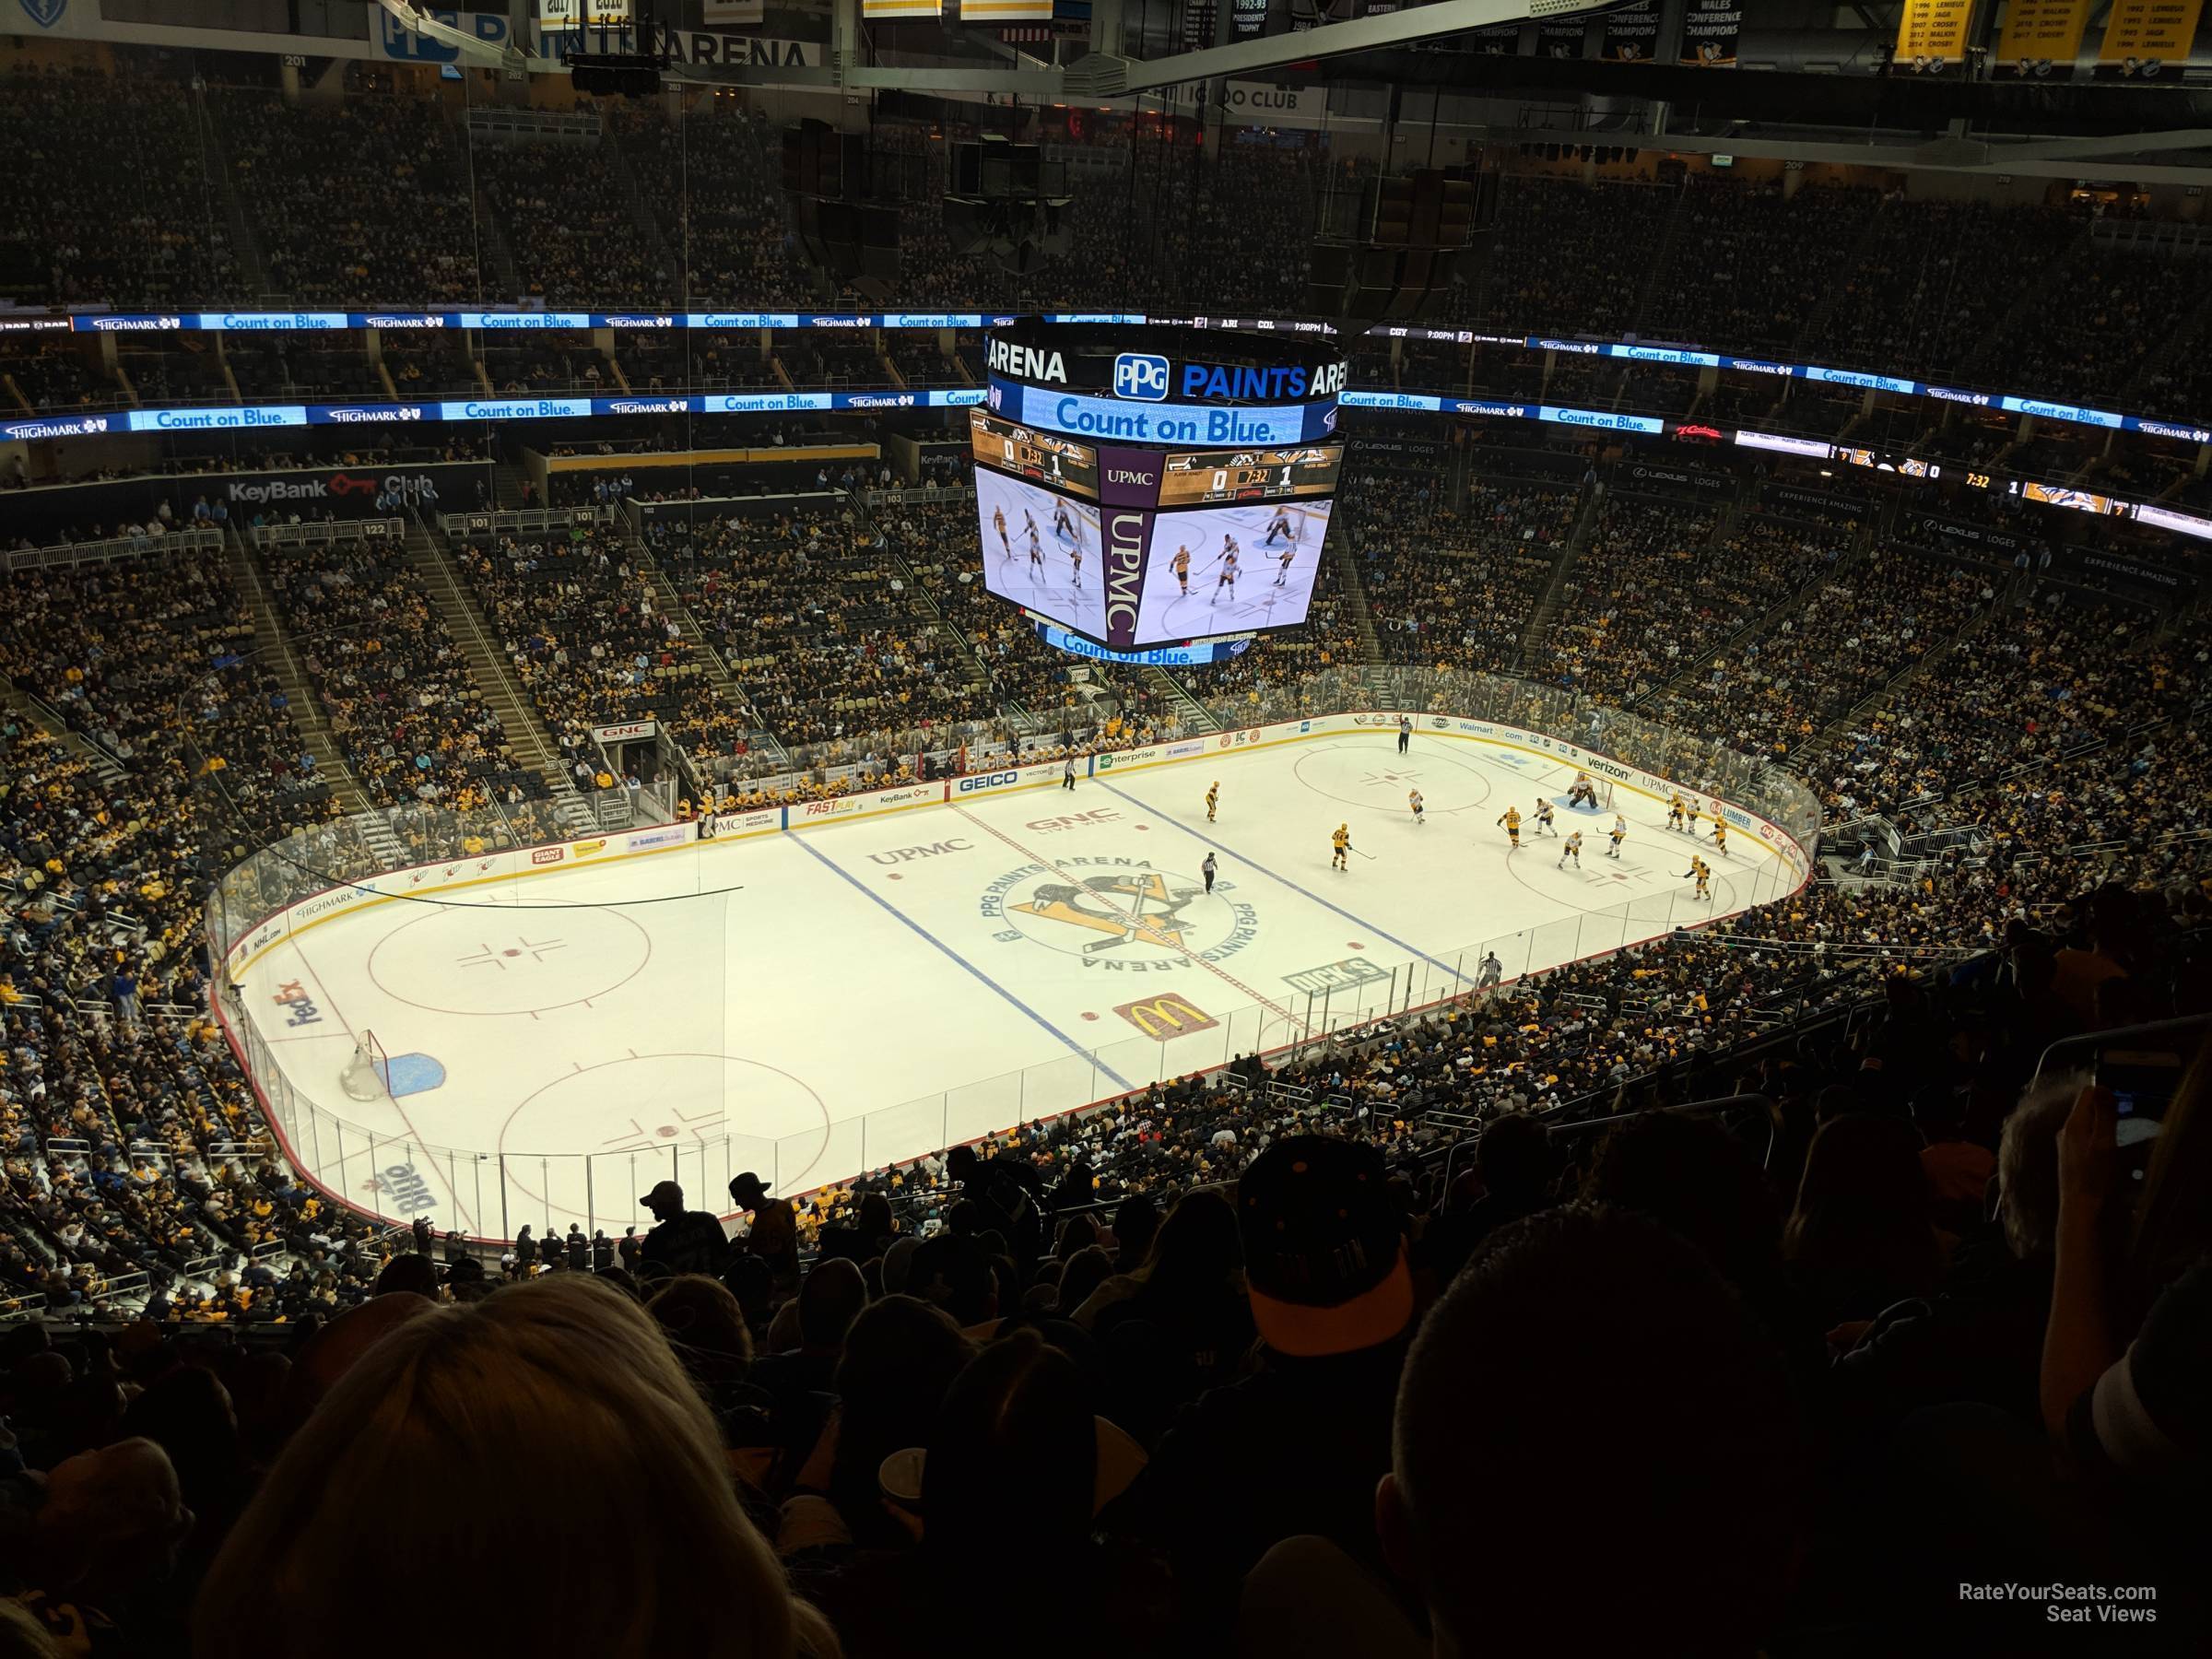 section 223, row sro seat view  for hockey - ppg paints arena